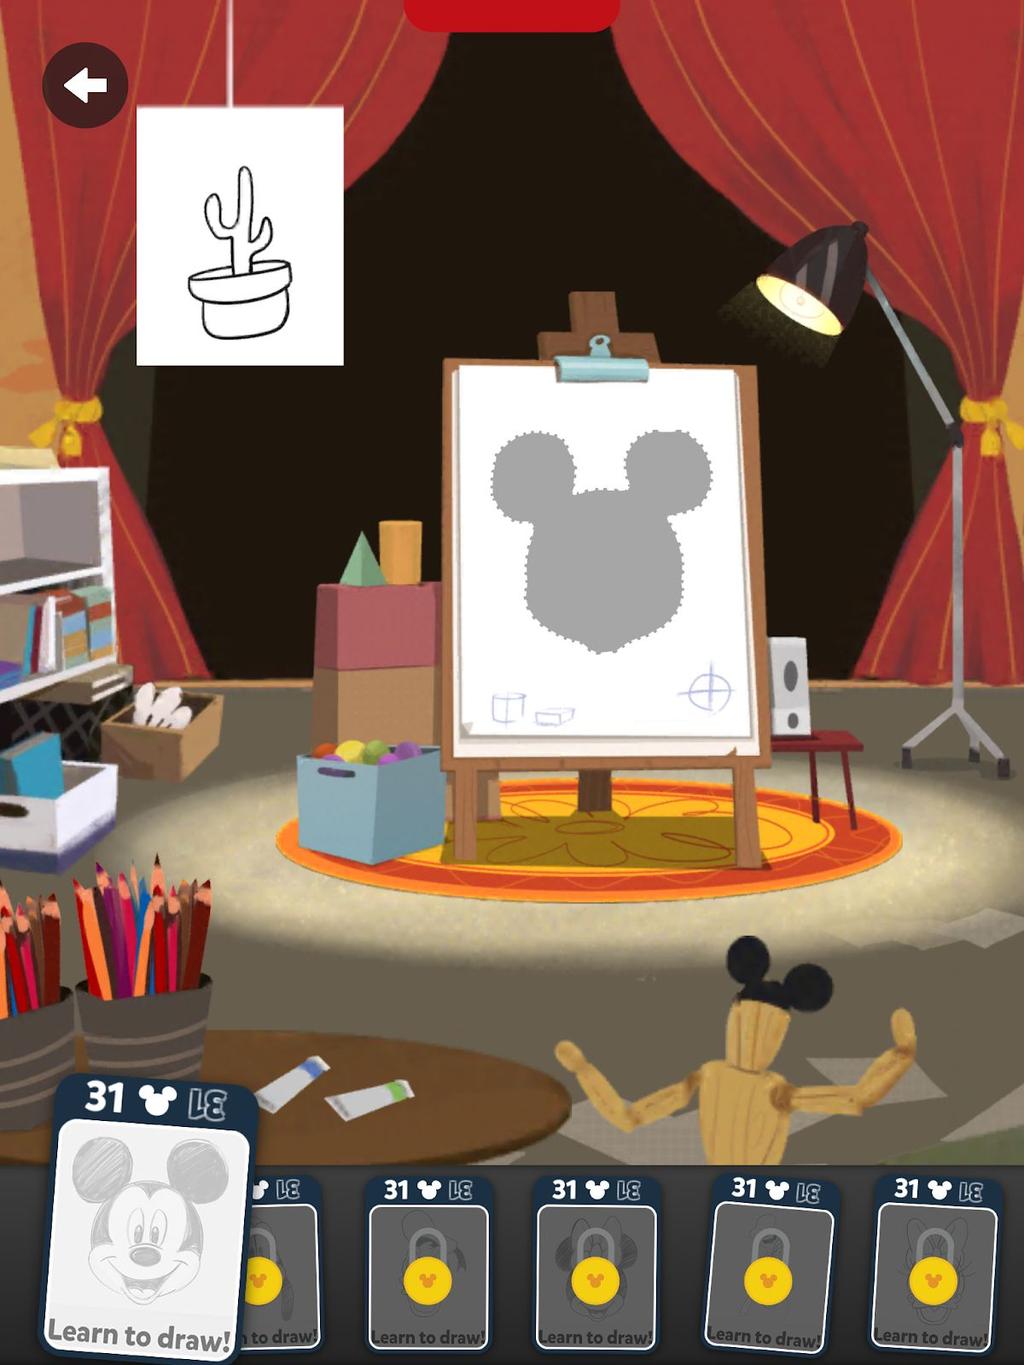 . 3. Tap on a drawing easel or tap at the bottom of the screen to start the drawing